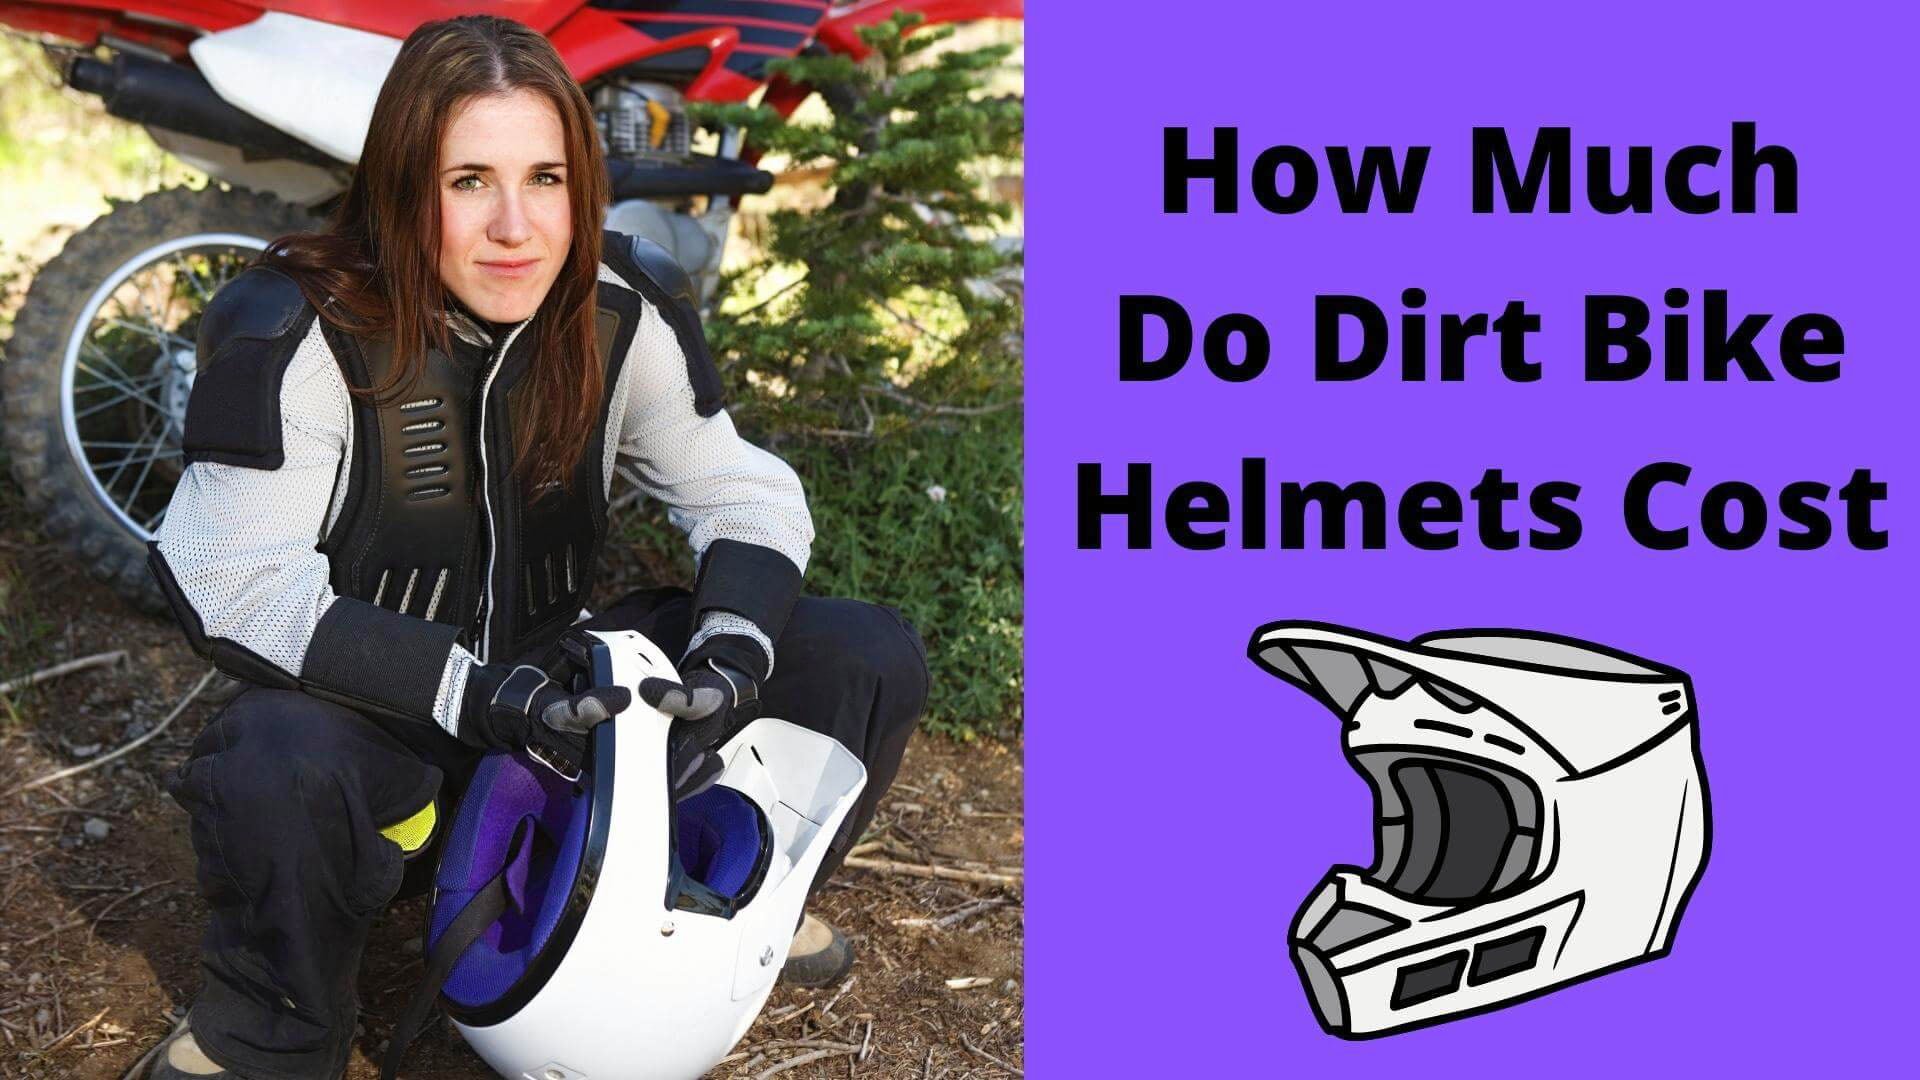 How Much Do Dirt Bike Helmets Cost? Here’s A Guide To Help You Save!